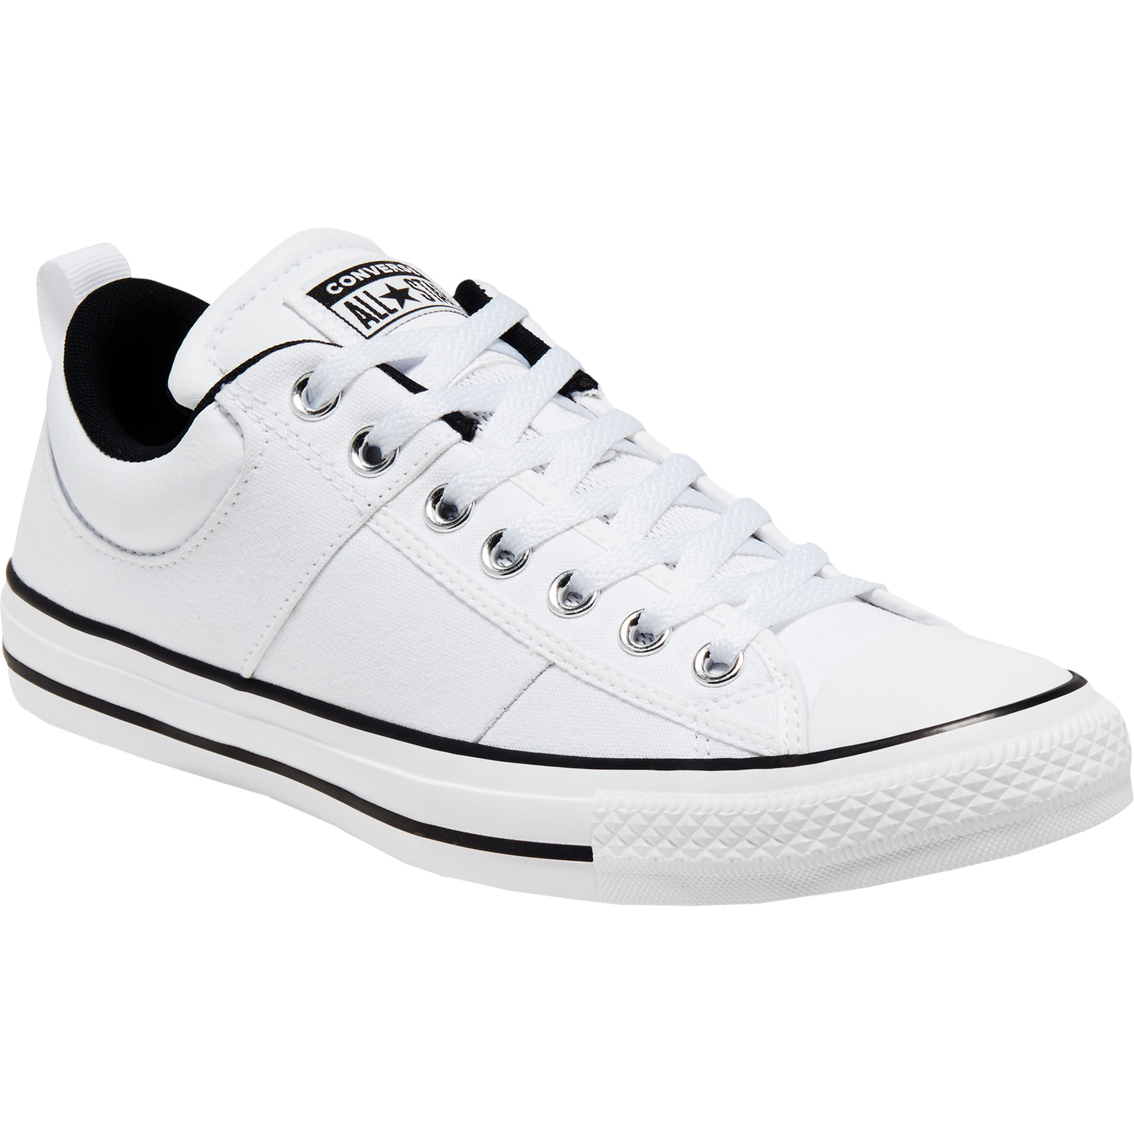 Star Cs Oxford Shoes | Sneakers | Shoes 